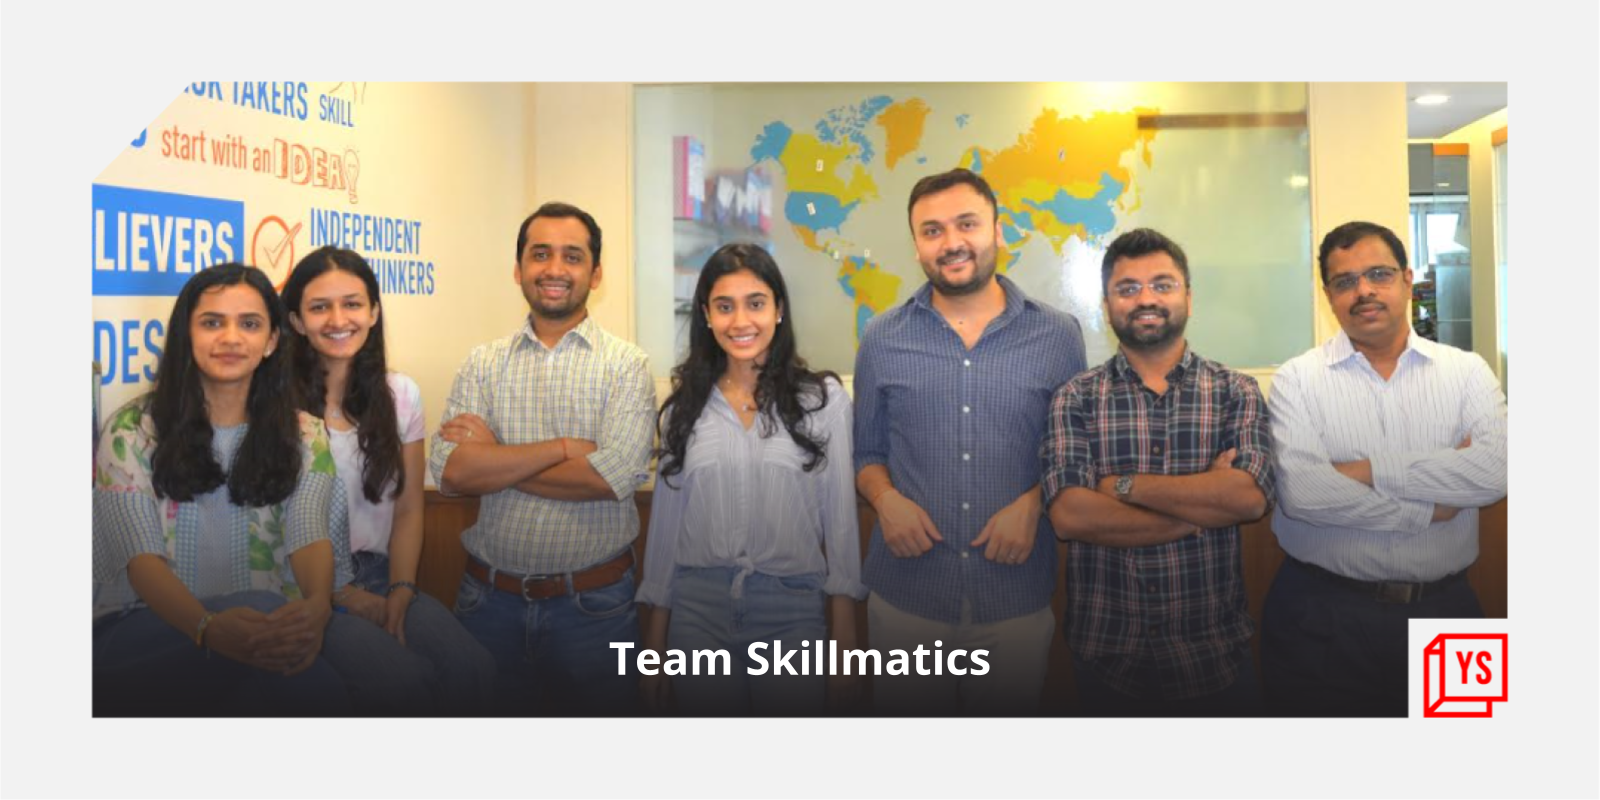 With 200 pc growth in FY21, Sequoia-backed educational gaming startup Skillmatics eyes international expansion